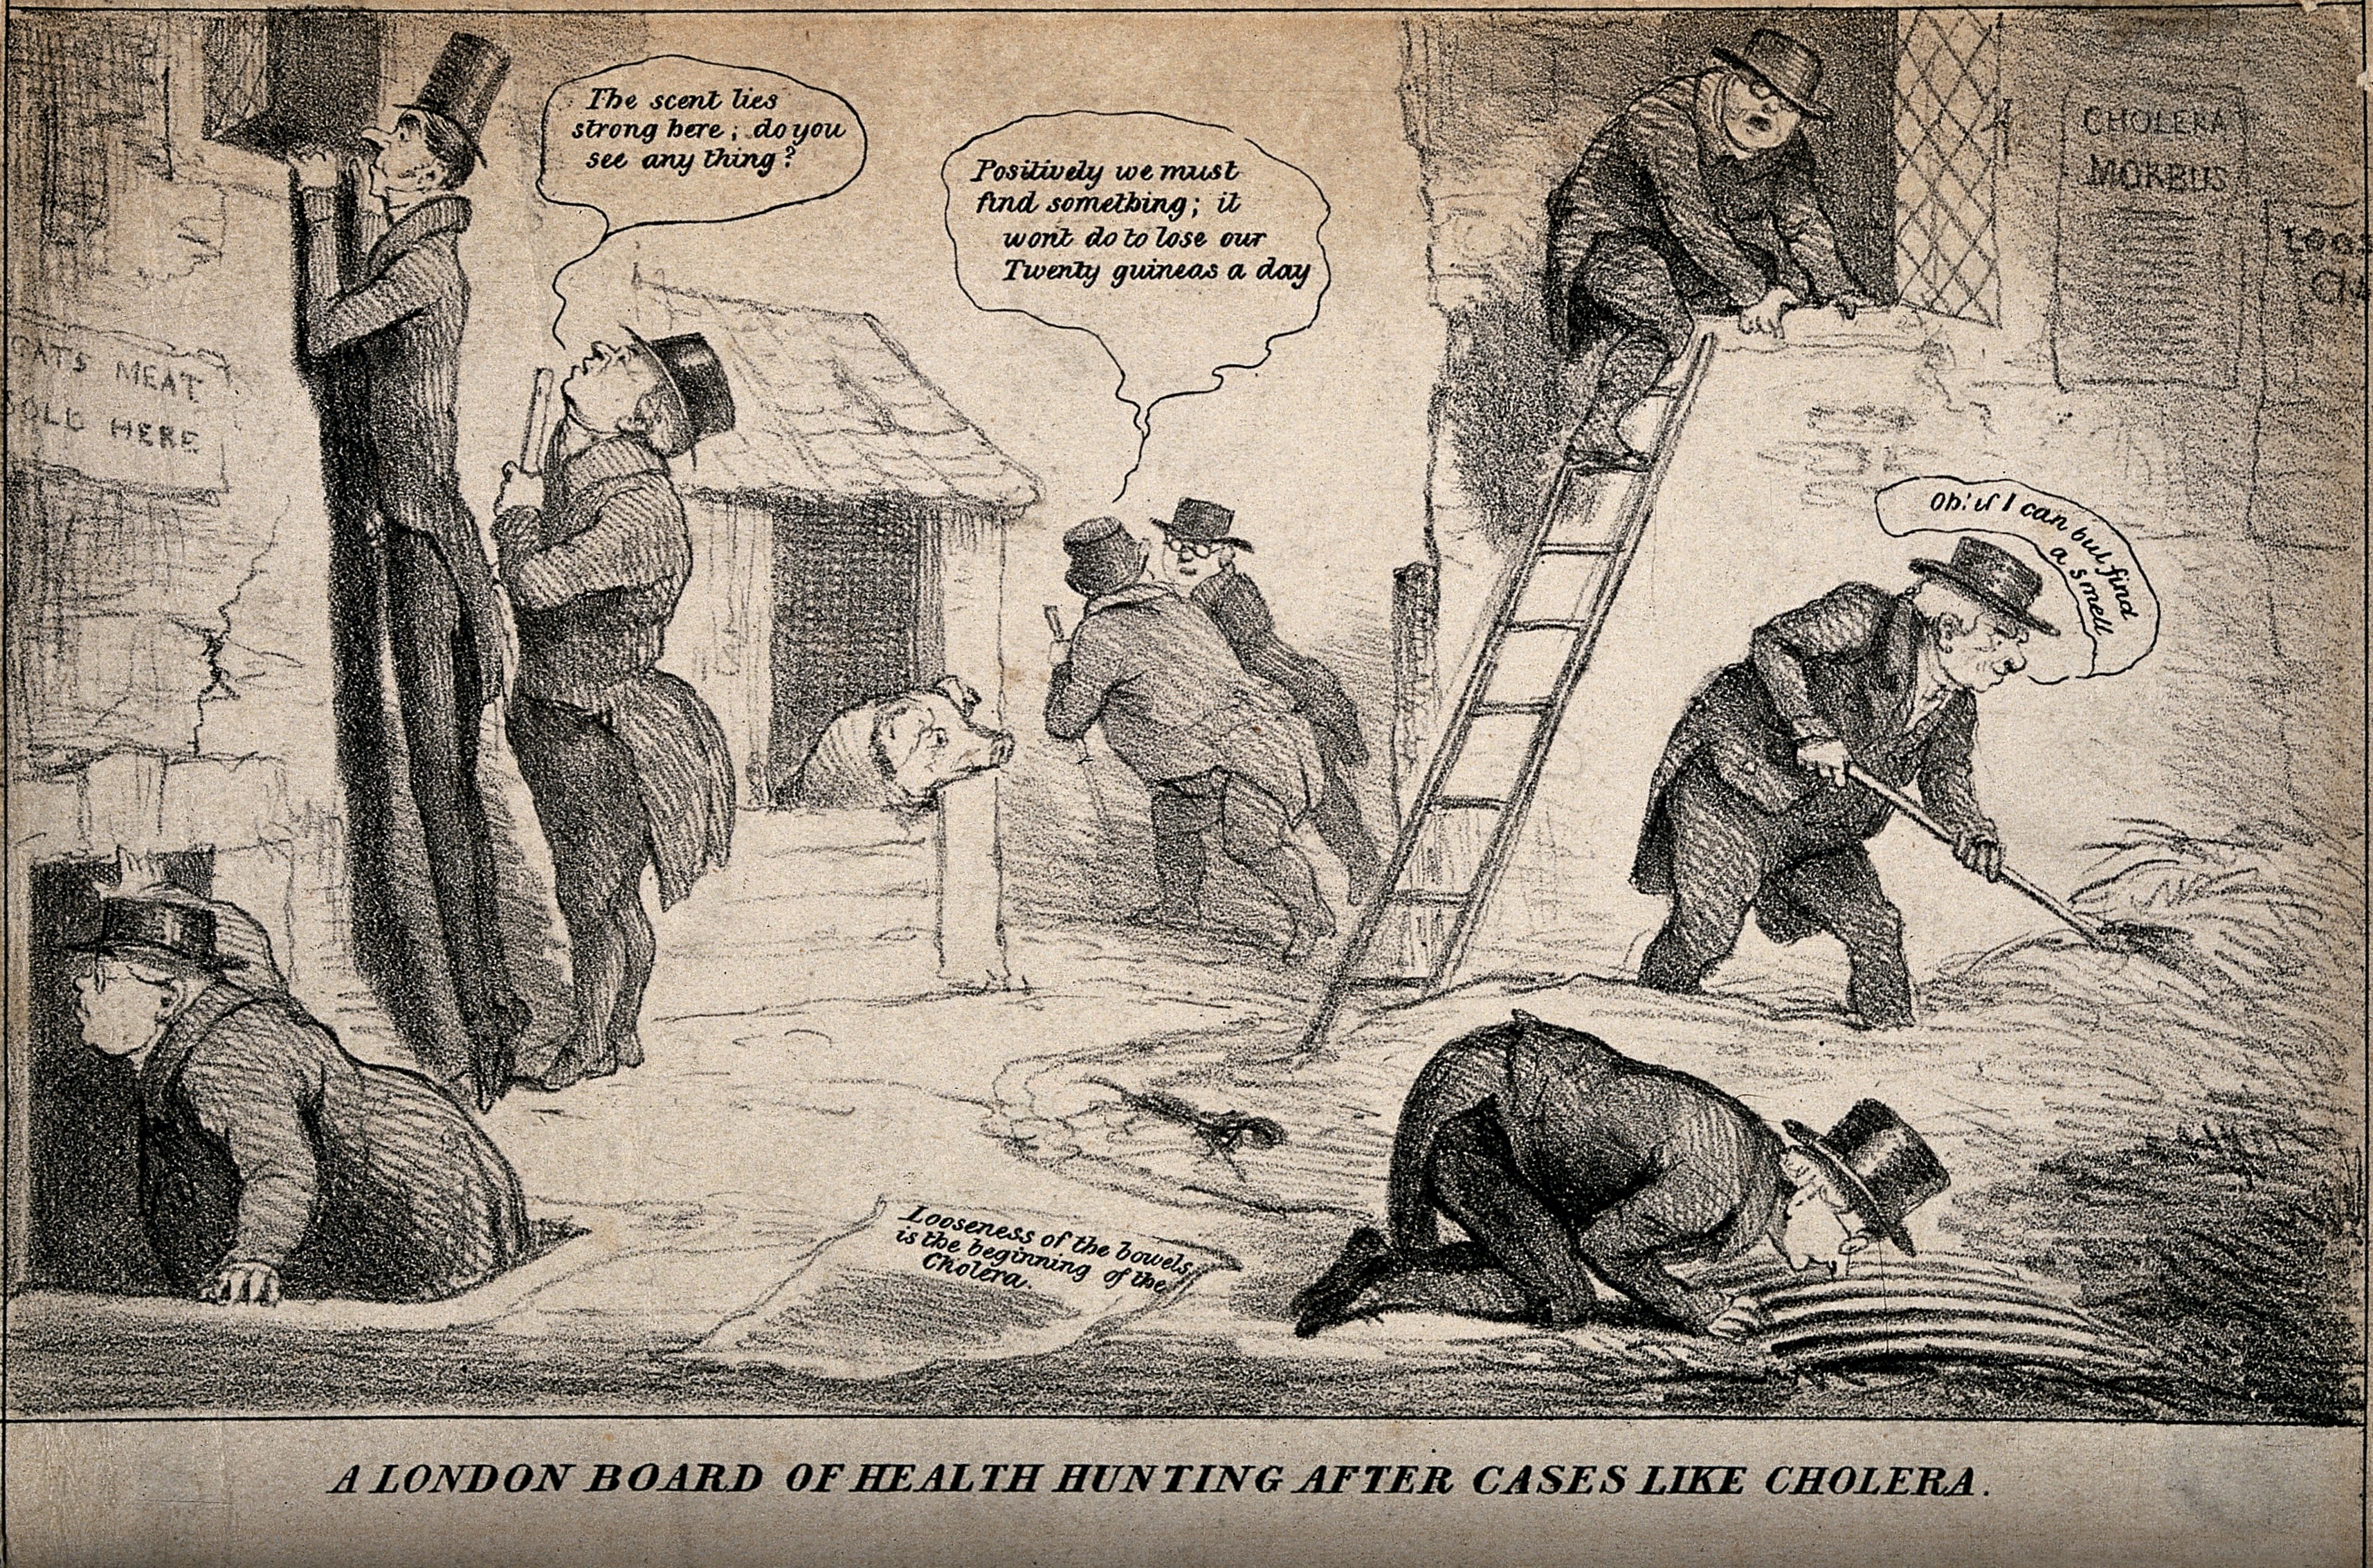 Cholera cartoon from paper 1854. All the people in the cartoon are looking in places that don't make any sense for Cholera (including windows, bails of hay, and in basements)